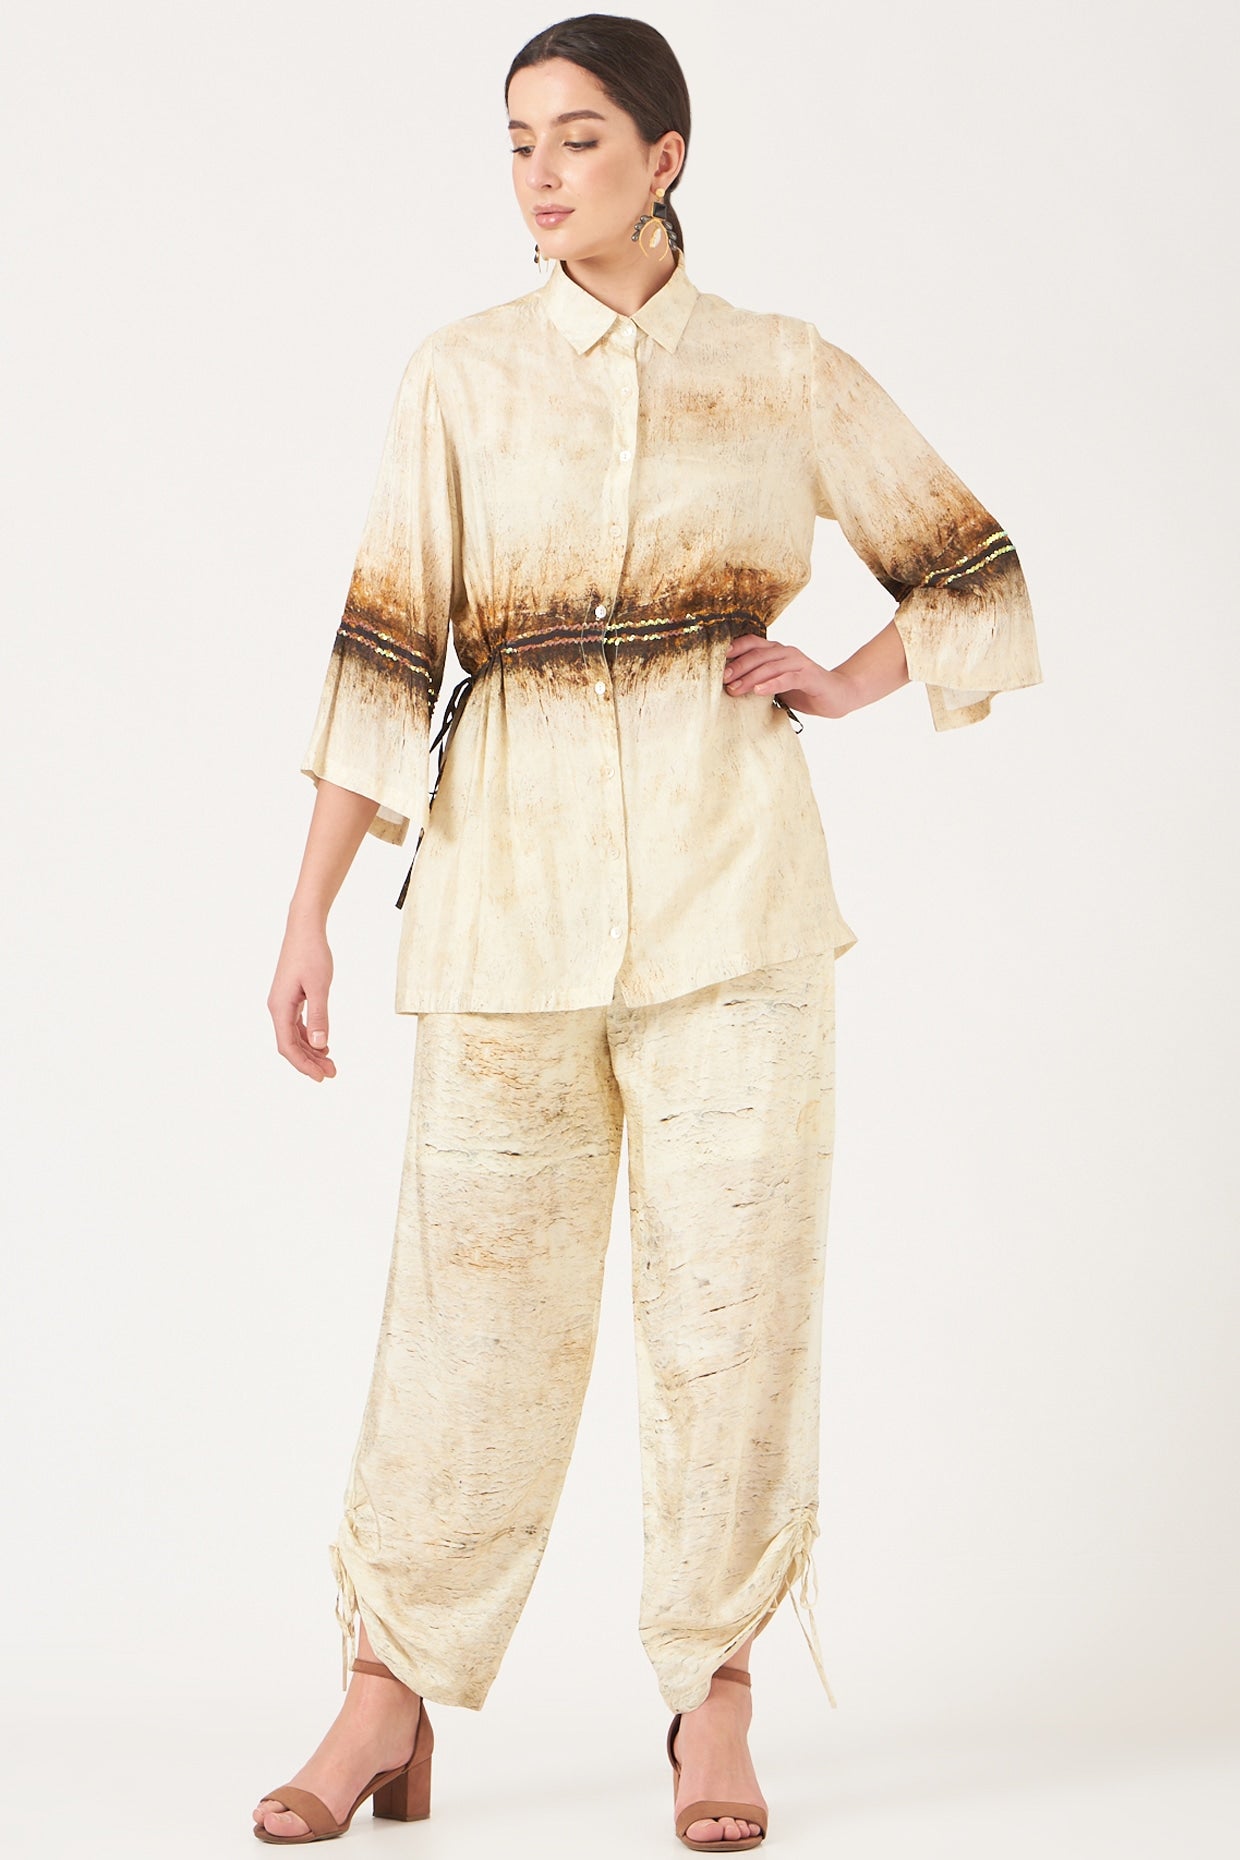 Beige And Gold Scar Print Top And Pants Coord Set.